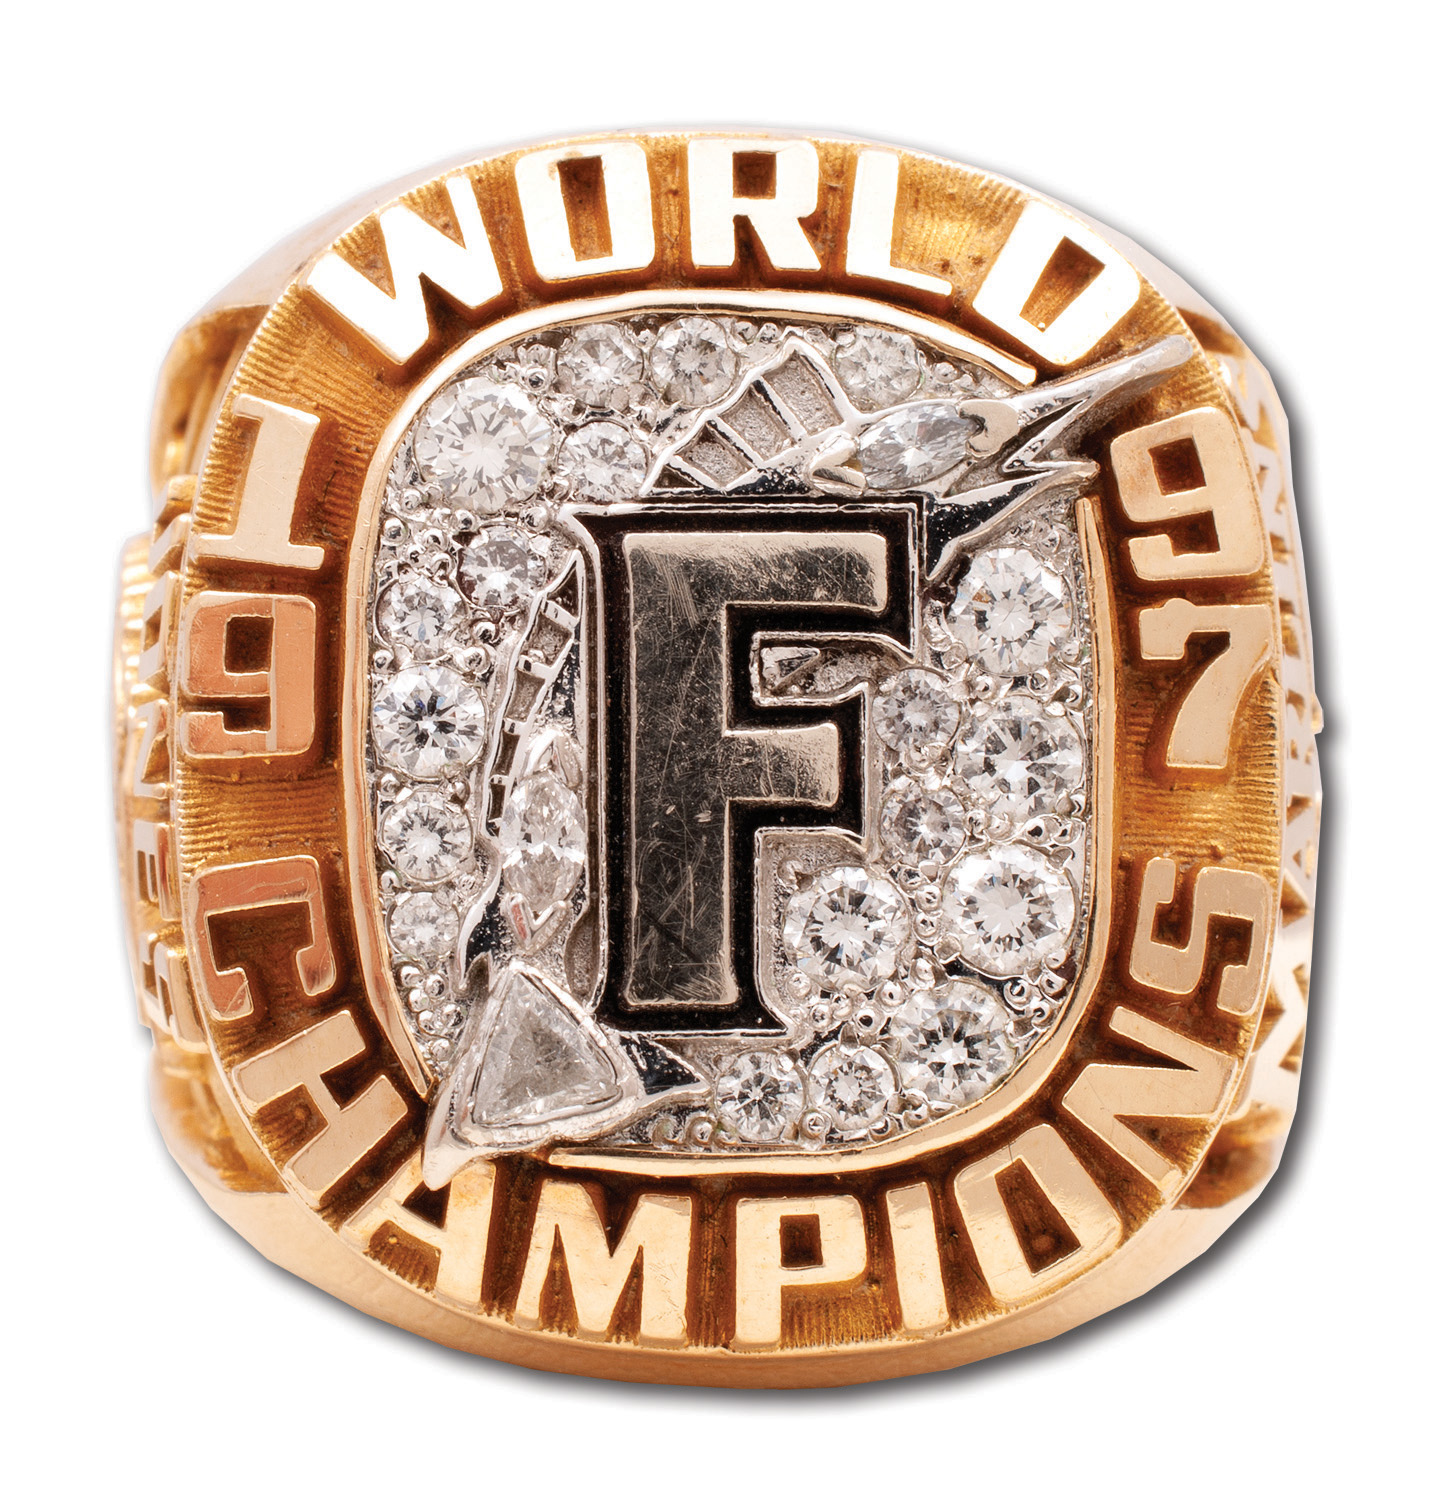 Miami Marlins - History, Records, Championships, Rings, Owner Details and  more.